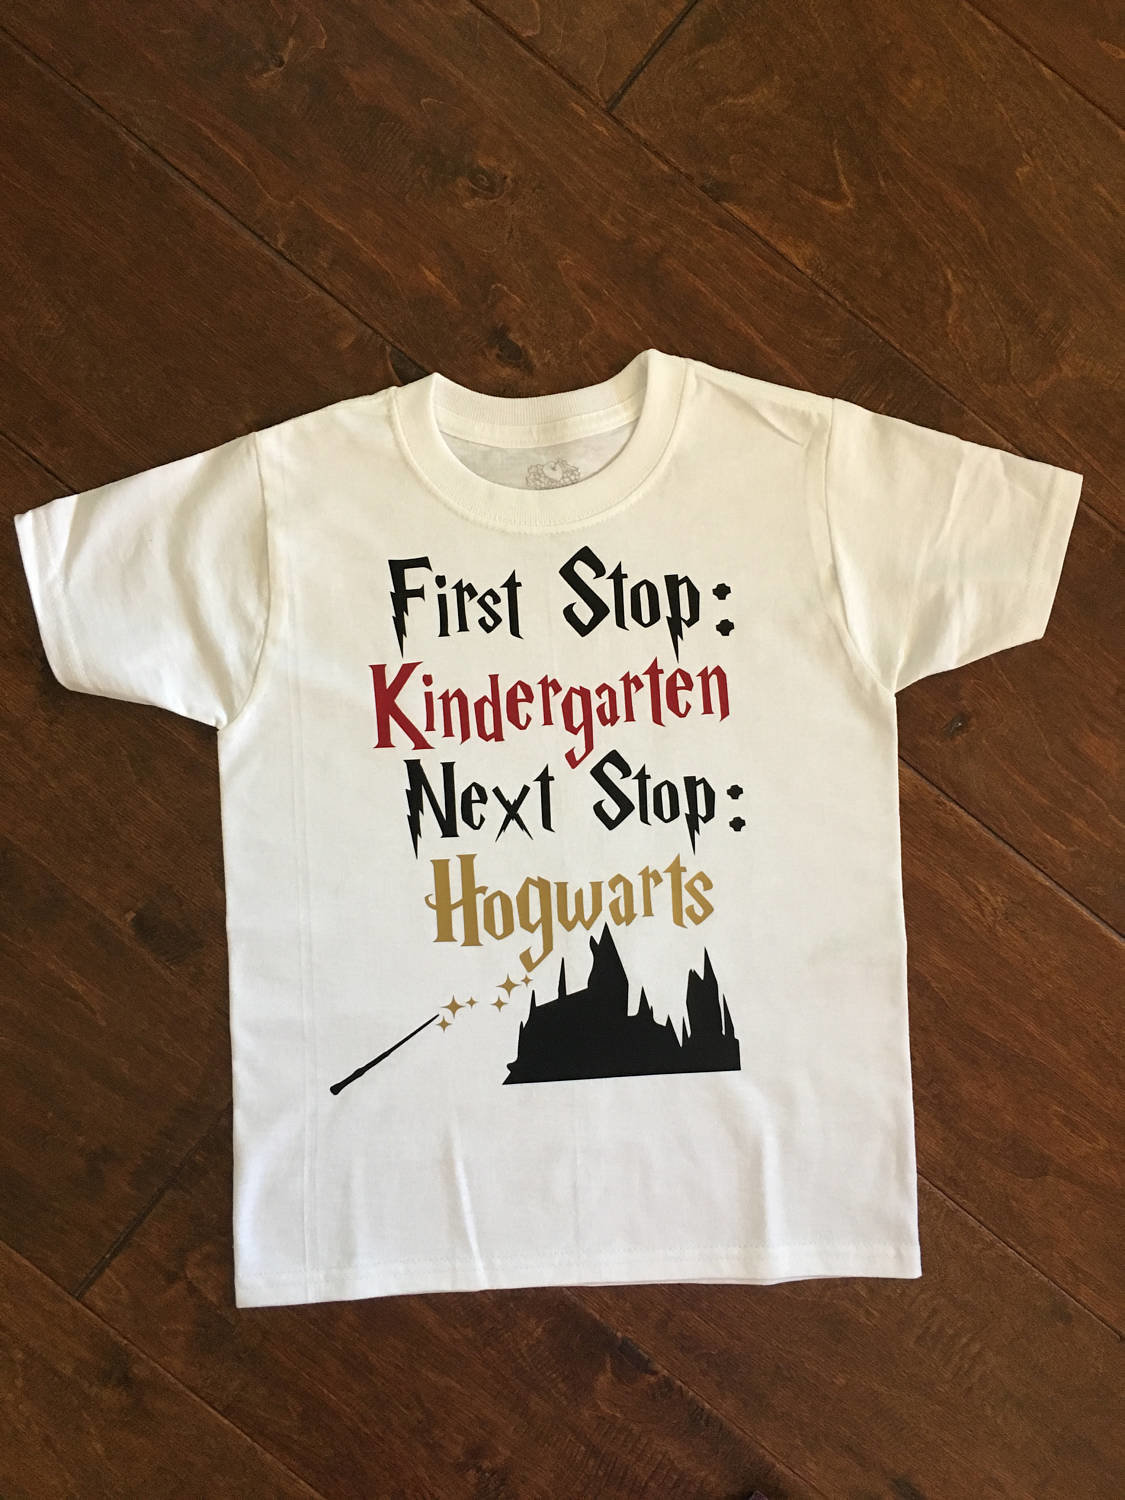 hogwarts baby clothes